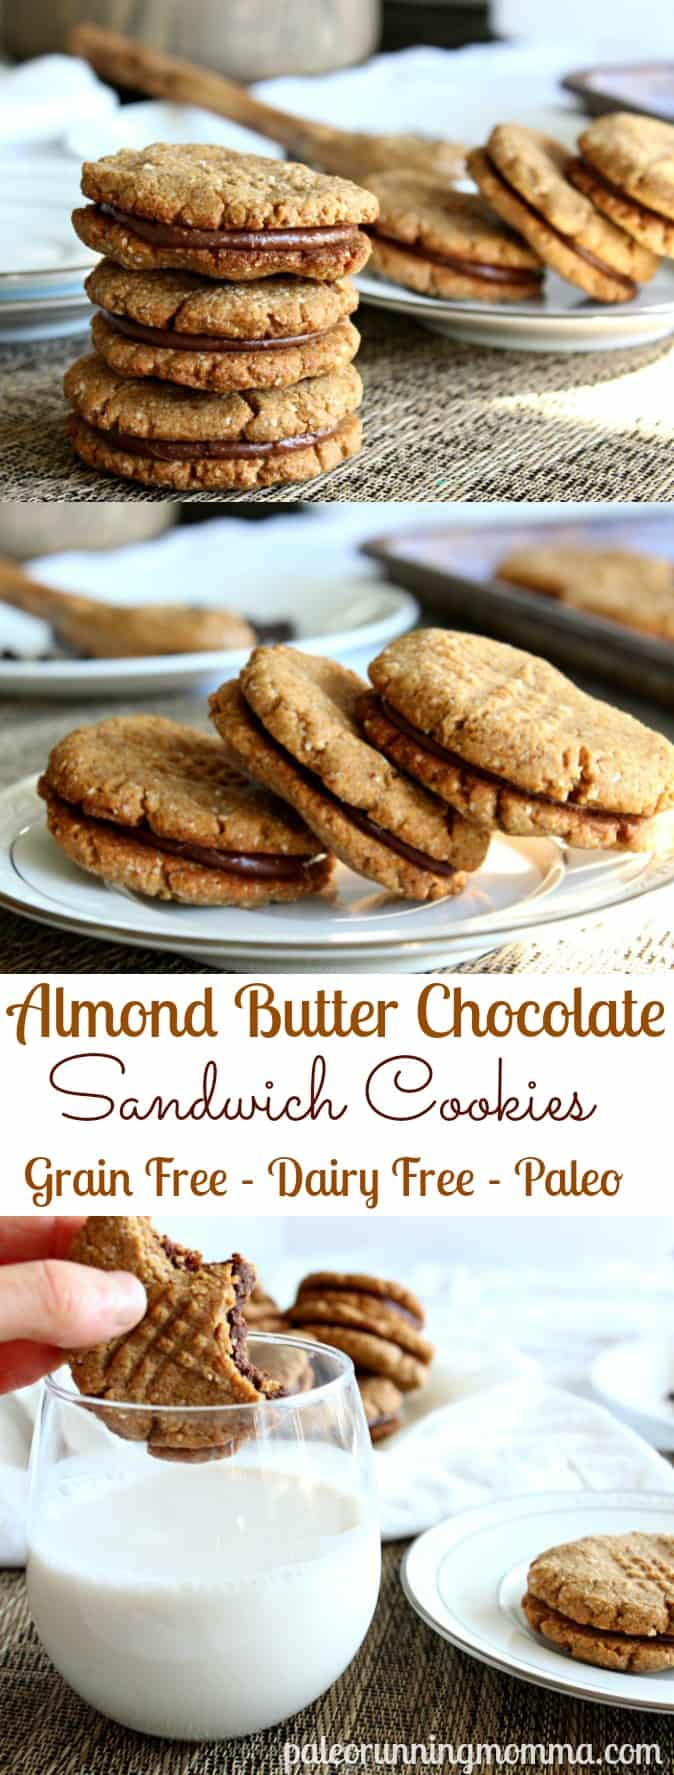 Amazingly Chewy and delicious Paleo Almond Butter Chocolate Sandwich Cookies that are grain free, gluten free, dairy free. You won't believe how easy they are to make!